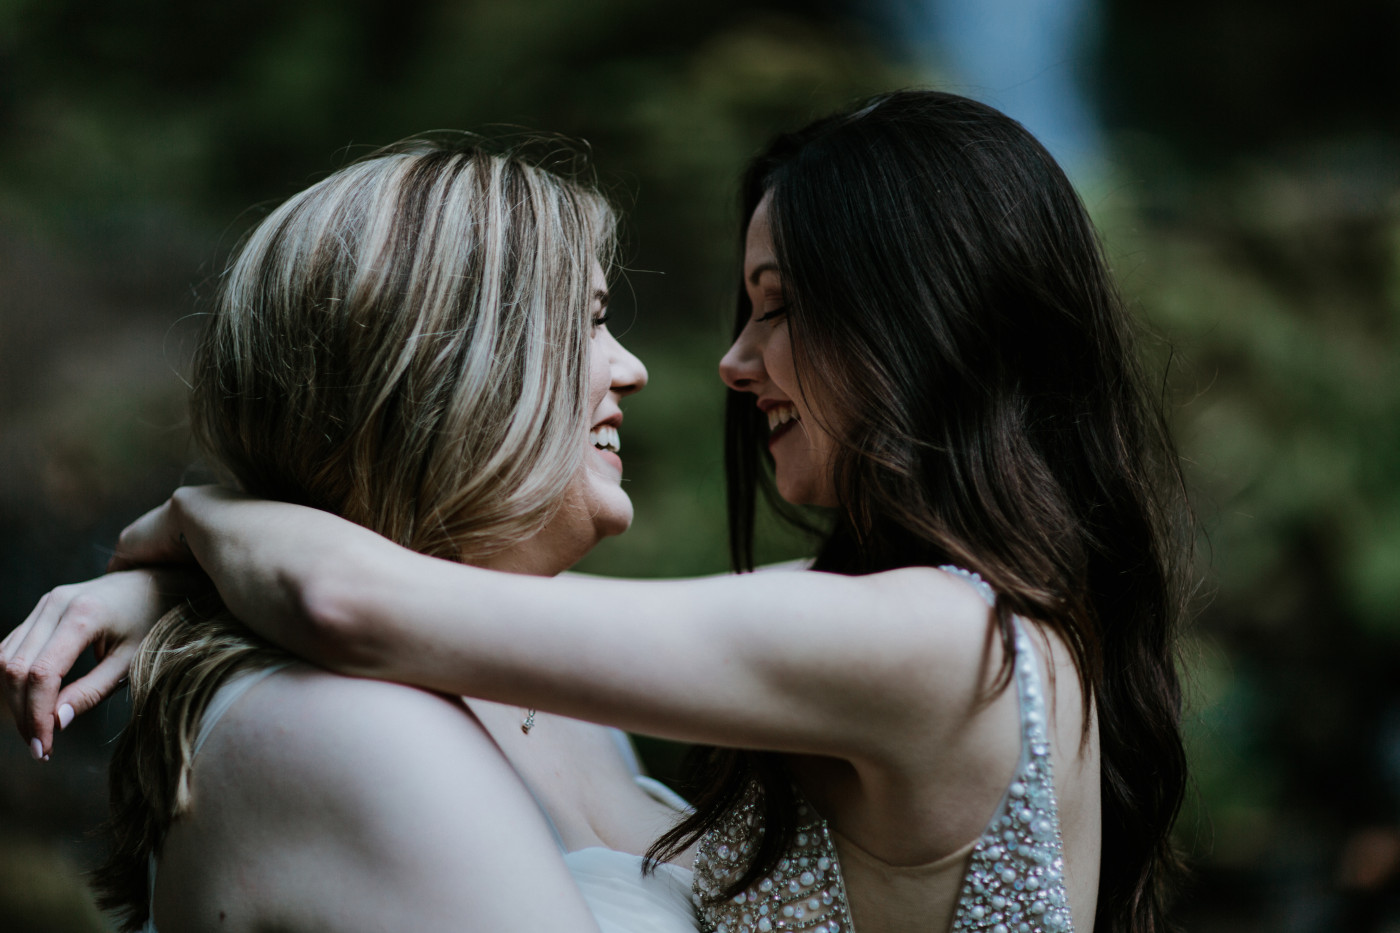 Tiffany and Hayley smile at each other. Elopement photography at the Columbia River Gorge by Sienna Plus Josh.